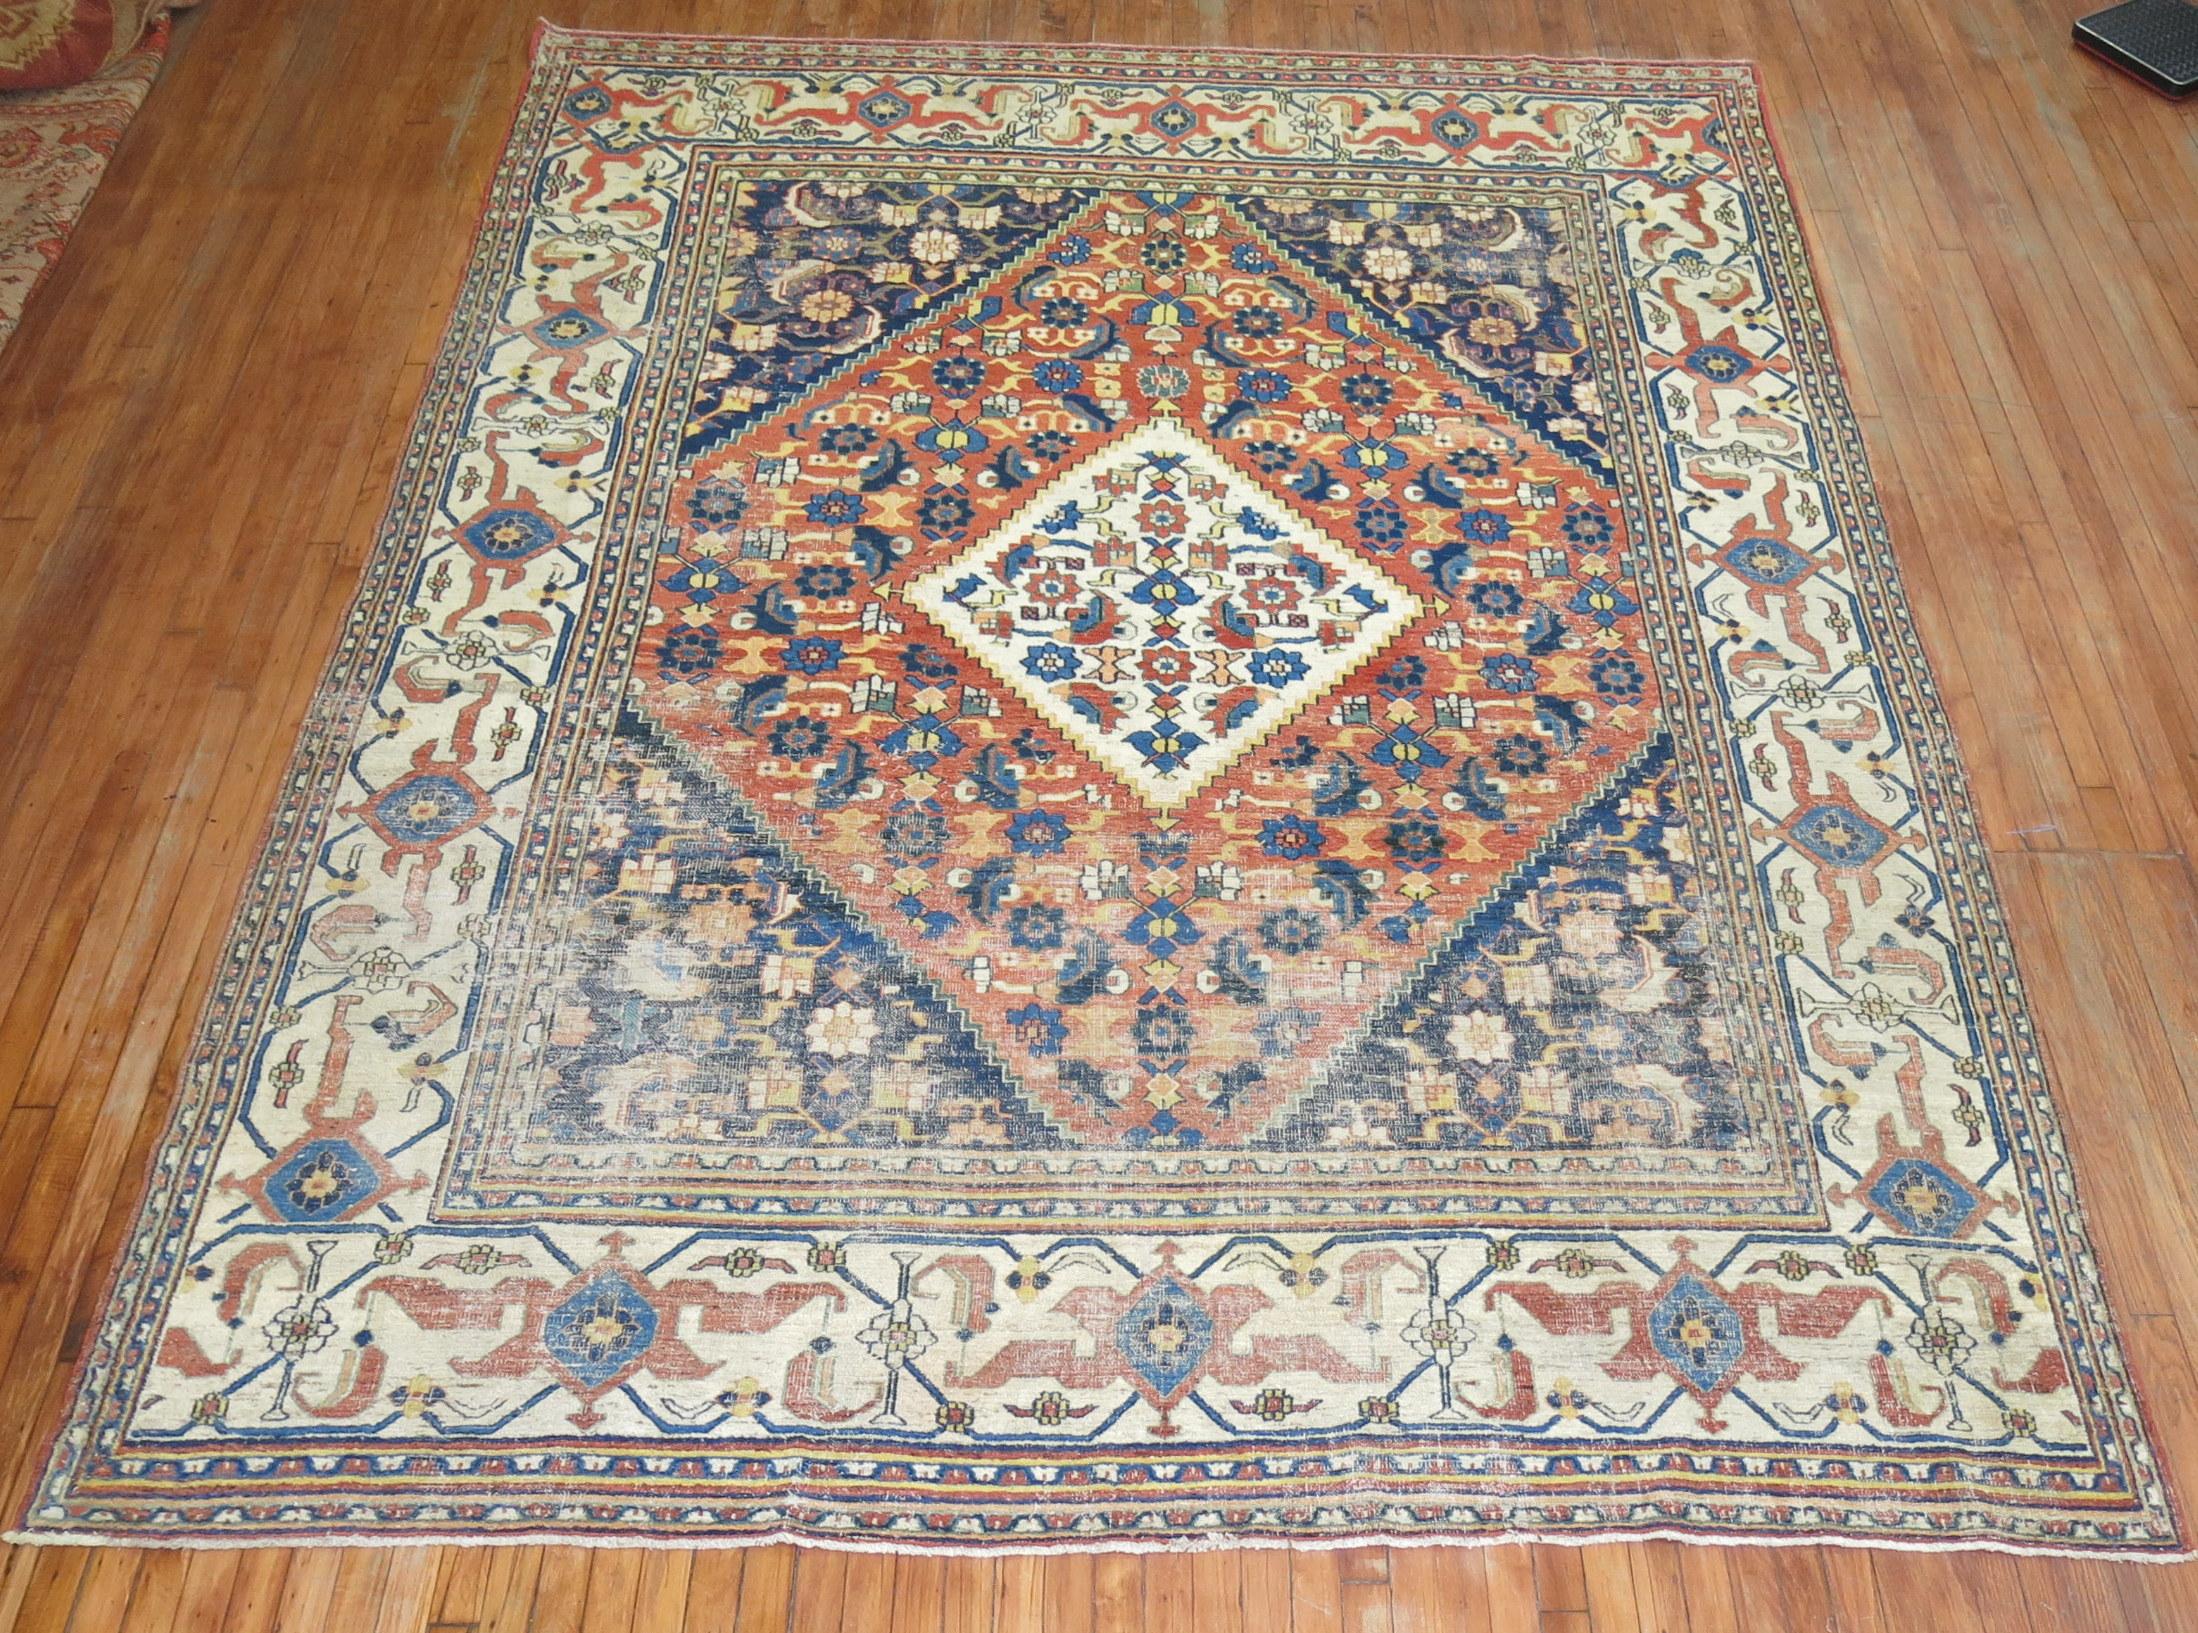 A naturally worn Persian doroksh rug with a traditional pallete in navy orange and ivory colors from the early 20th century,

circa 1910, measures: 8'6